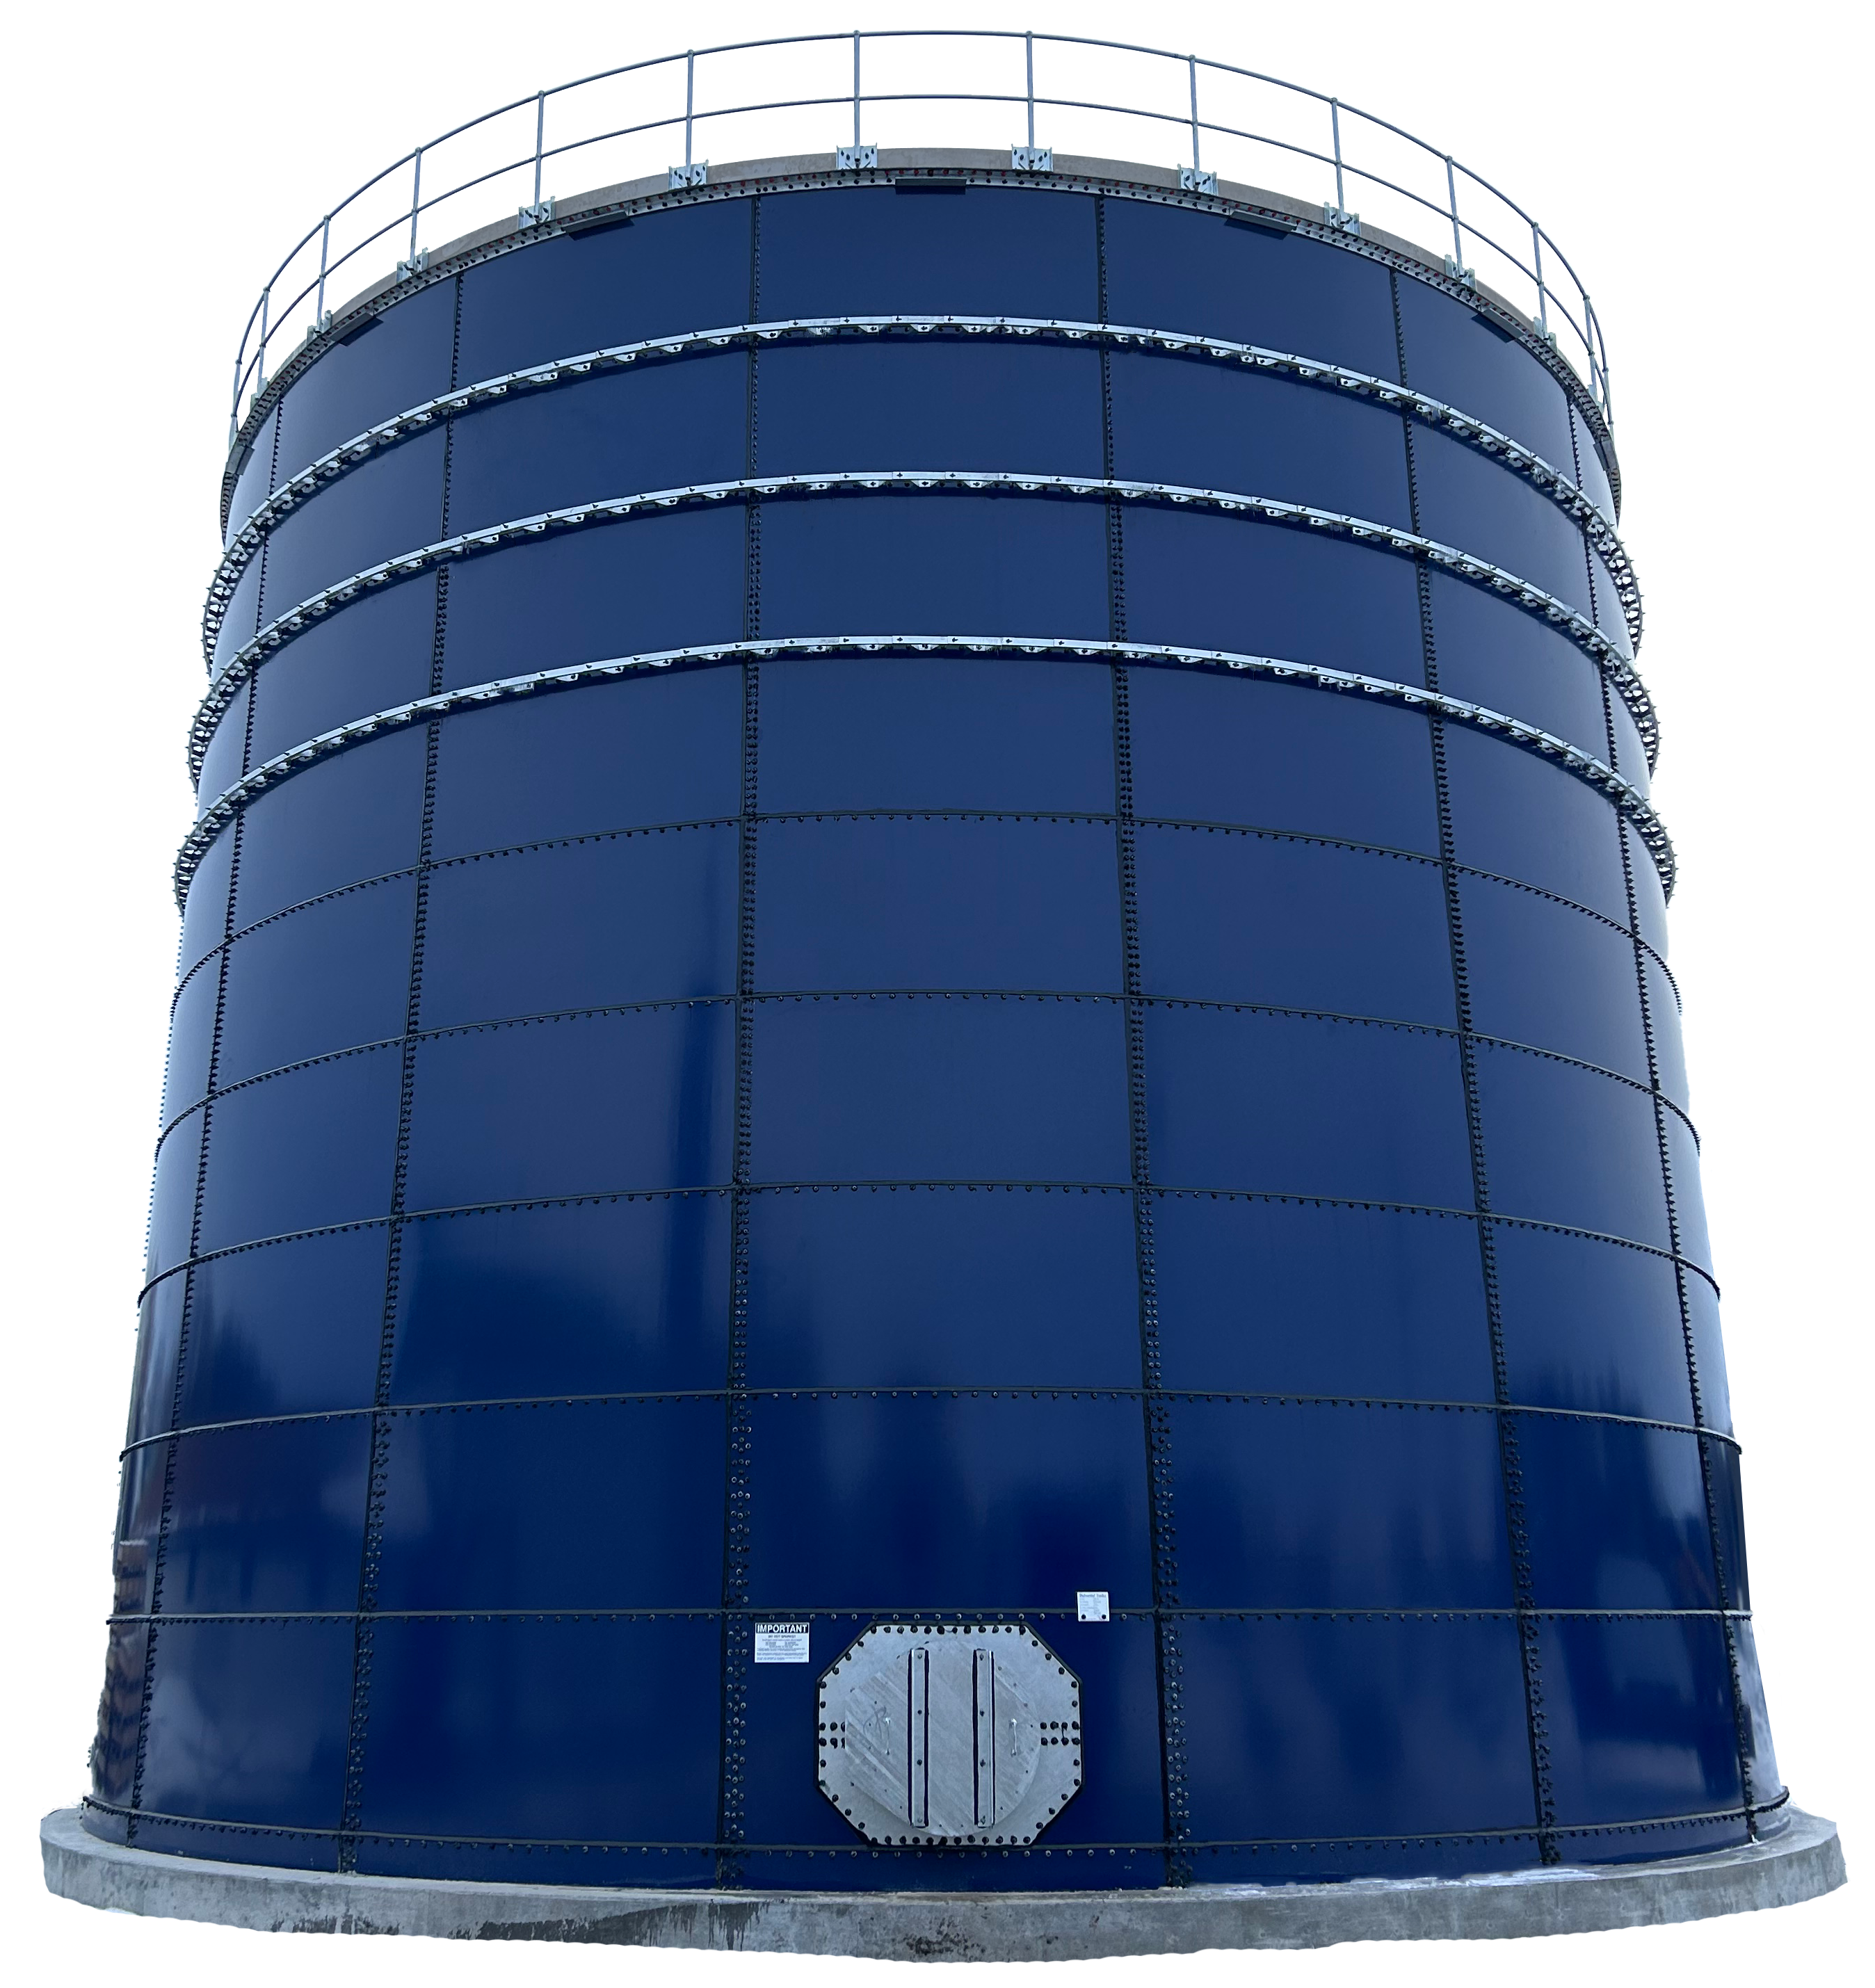 Epoxy-Coated Vs. Glass-Fused-to-Steel: Which Tank Is Better